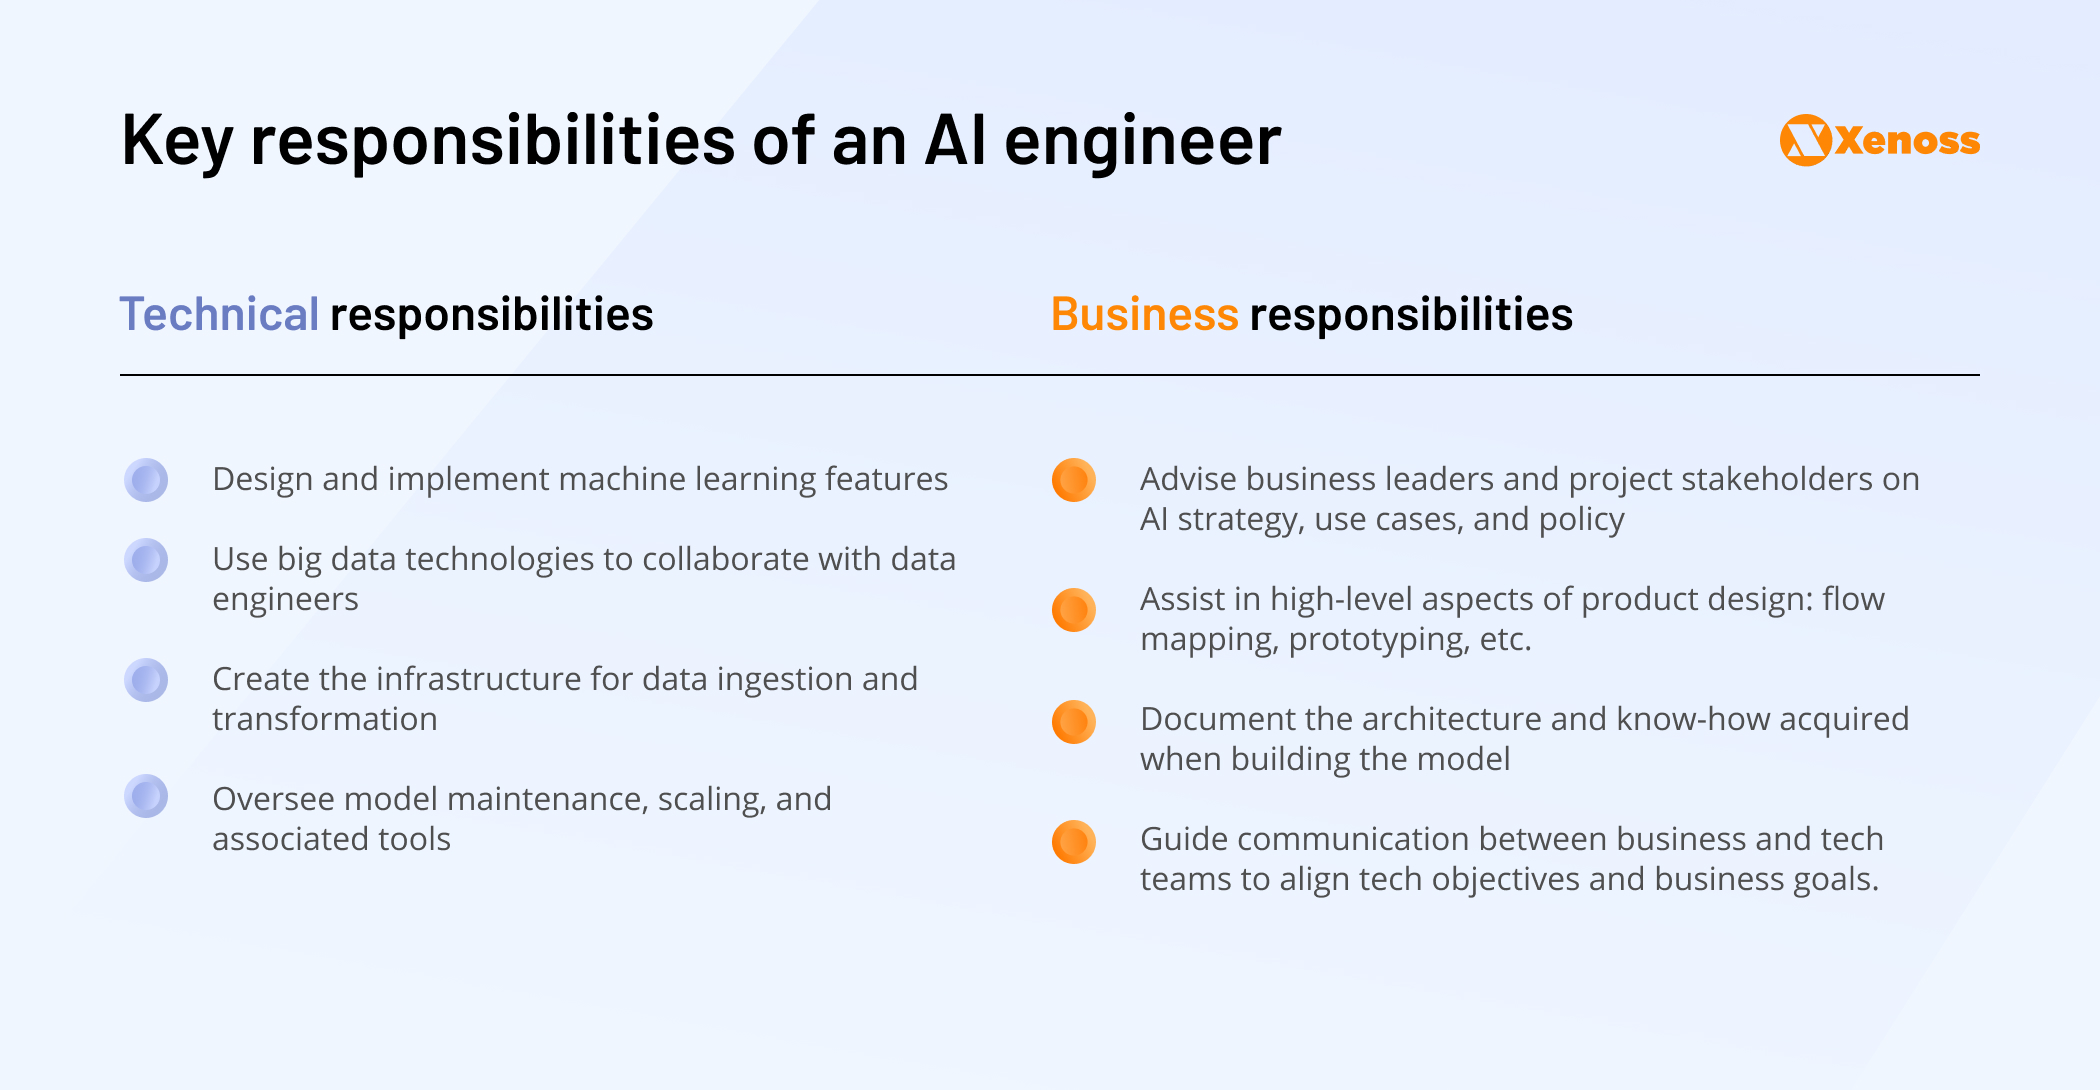 Table describing technical and business responsibilities of AI engineers